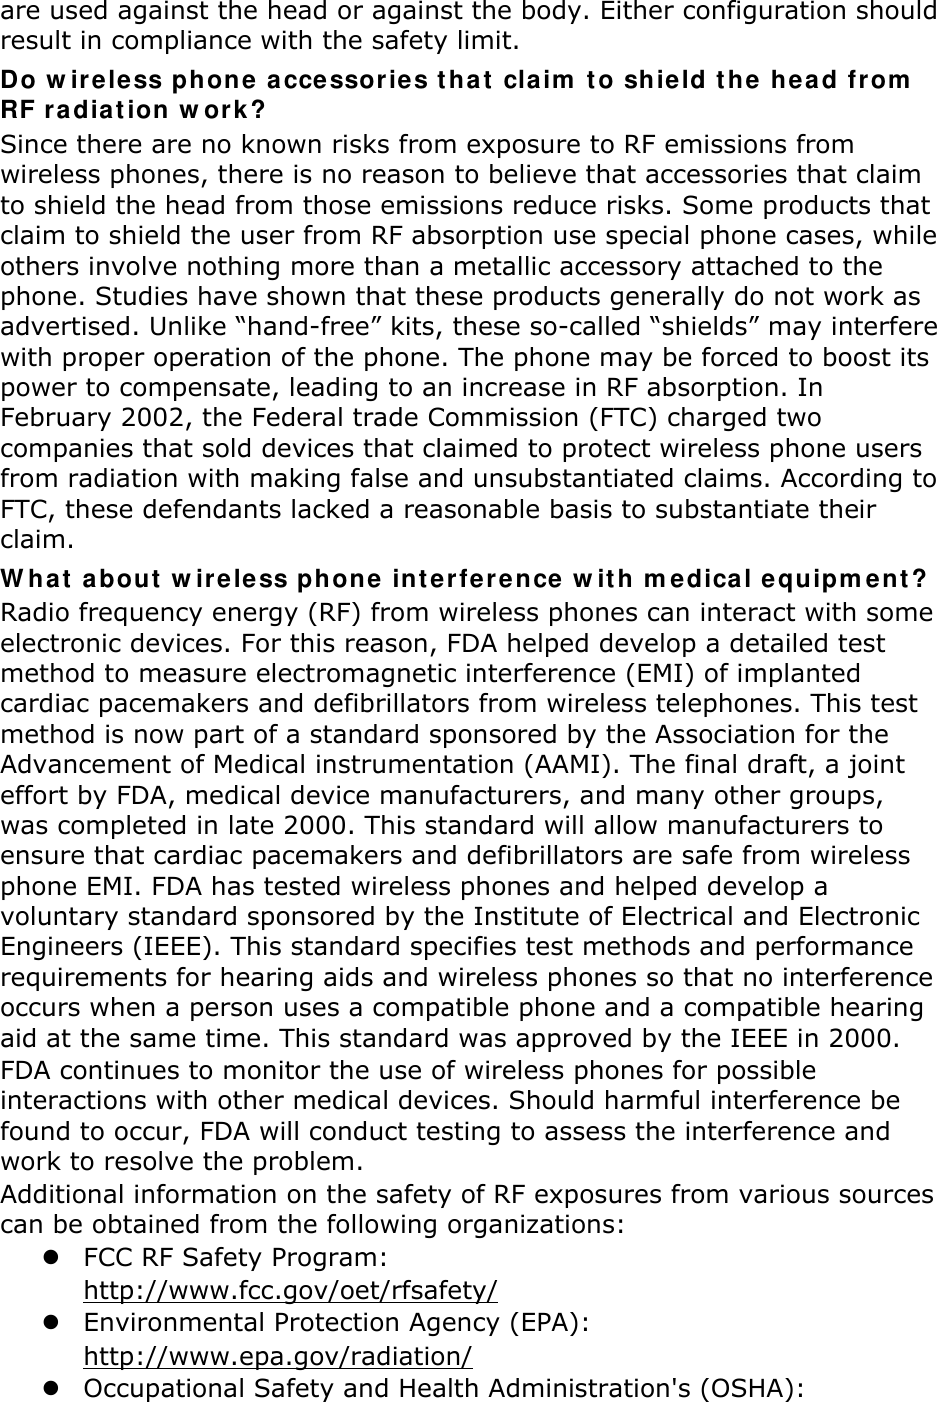 are used against the head or against the body. Either configuration should result in compliance with the safety limit. Do w ireless phone accessories tha t  claim  t o shield t he head from  RF radia t ion w ork ? Since there are no known risks from exposure to RF emissions from wireless phones, there is no reason to believe that accessories that claim to shield the head from those emissions reduce risks. Some products that claim to shield the user from RF absorption use special phone cases, while others involve nothing more than a metallic accessory attached to the phone. Studies have shown that these products generally do not work as advertised. Unlike “hand-free” kits, these so-called “shields” may interfere with proper operation of the phone. The phone may be forced to boost its power to compensate, leading to an increase in RF absorption. In February 2002, the Federal trade Commission (FTC) charged two companies that sold devices that claimed to protect wireless phone users from radiation with making false and unsubstantiated claims. According to FTC, these defendants lacked a reasonable basis to substantiate their claim. W h a t  a bout  w ireless phone  int e r fe r e nce w it h m edica l equipm e n t ? Radio frequency energy (RF) from wireless phones can interact with some electronic devices. For this reason, FDA helped develop a detailed test method to measure electromagnetic interference (EMI) of implanted cardiac pacemakers and defibrillators from wireless telephones. This test method is now part of a standard sponsored by the Association for the Advancement of Medical instrumentation (AAMI). The final draft, a joint effort by FDA, medical device manufacturers, and many other groups, was completed in late 2000. This standard will allow manufacturers to ensure that cardiac pacemakers and defibrillators are safe from wireless phone EMI. FDA has tested wireless phones and helped develop a voluntary standard sponsored by the Institute of Electrical and Electronic Engineers (IEEE). This standard specifies test methods and performance requirements for hearing aids and wireless phones so that no interference occurs when a person uses a compatible phone and a compatible hearing aid at the same time. This standard was approved by the IEEE in 2000. FDA continues to monitor the use of wireless phones for possible interactions with other medical devices. Should harmful interference be found to occur, FDA will conduct testing to assess the interference and work to resolve the problem. Additional information on the safety of RF exposures from various sources can be obtained from the following organizations:  FCC RF Safety Program:   http://www.fcc.gov/oet/rfsafety/  Environmental Protection Agency (EPA):   http://www.epa.gov/radiation/  Occupational Safety and Health Administration&apos;s (OSHA):   